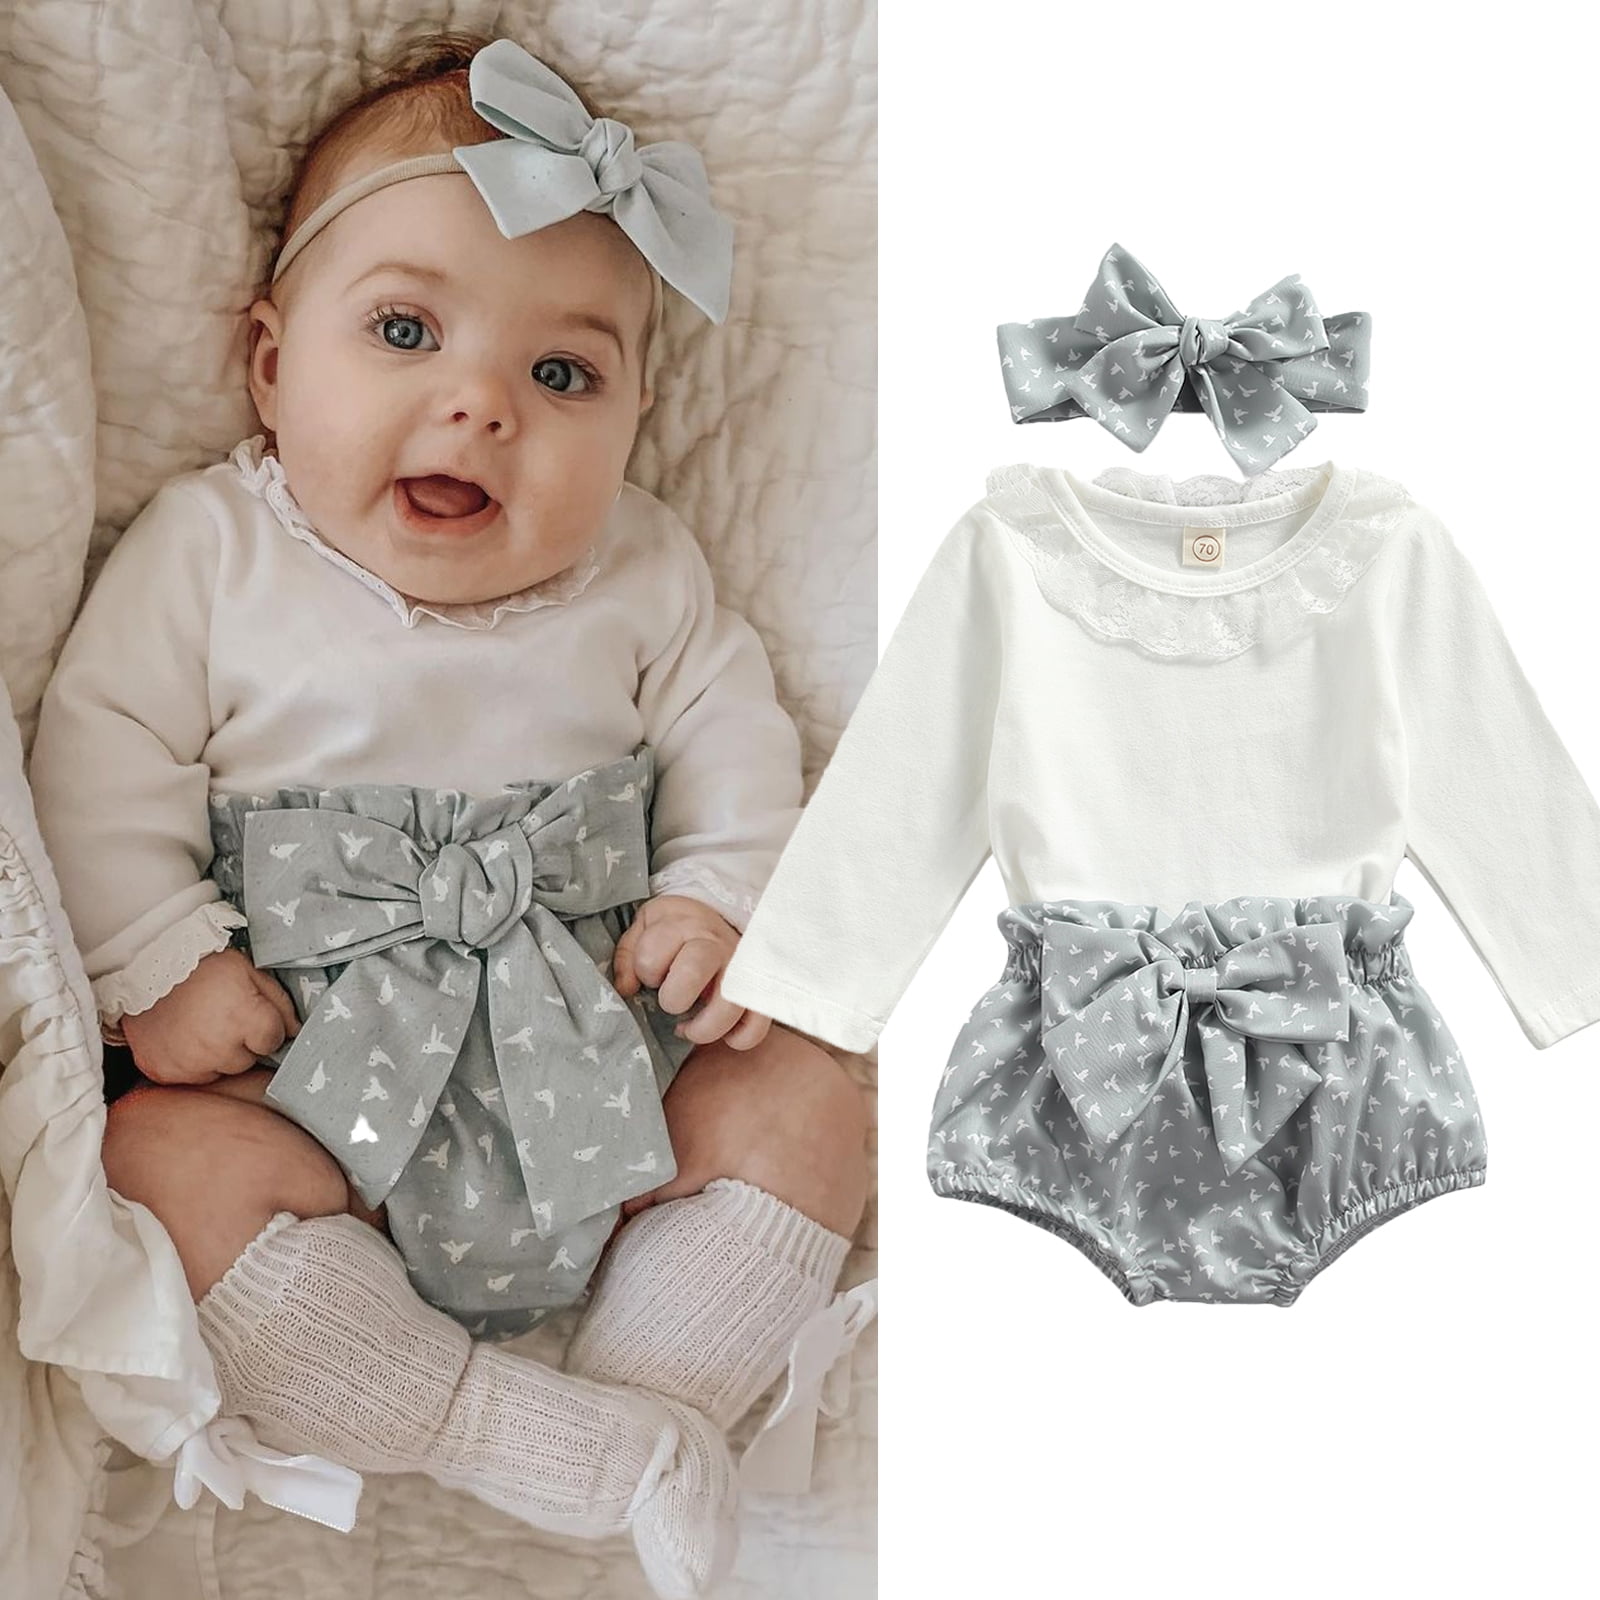 Sunisery Newborn Baby Girl Fall Winter Clothes Outfits Lace Romper Bodysuit  Floral Shorts Pants Headband Set Gray 12-18 Months